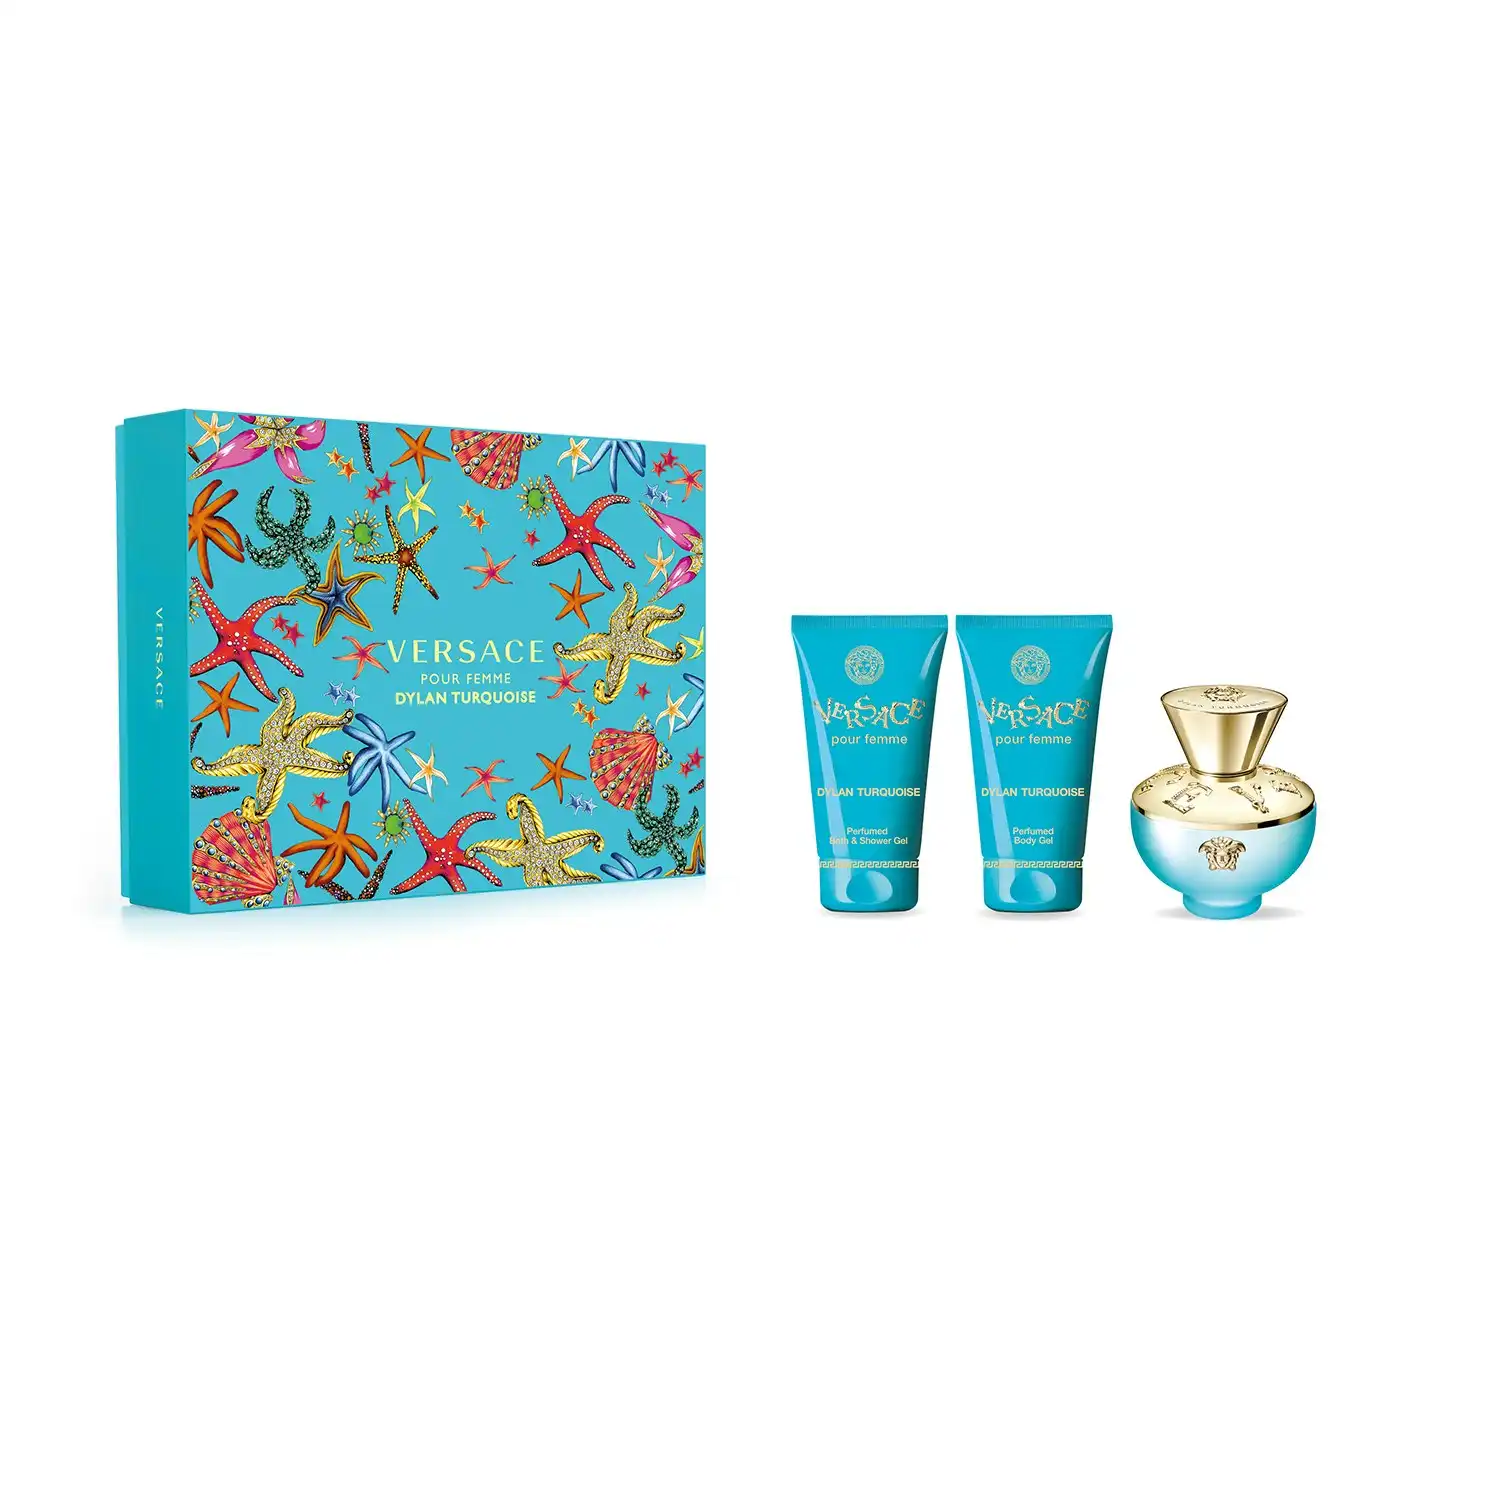 Versace Dylan Turquoise EDT 50ml 3 Piece Gift Set